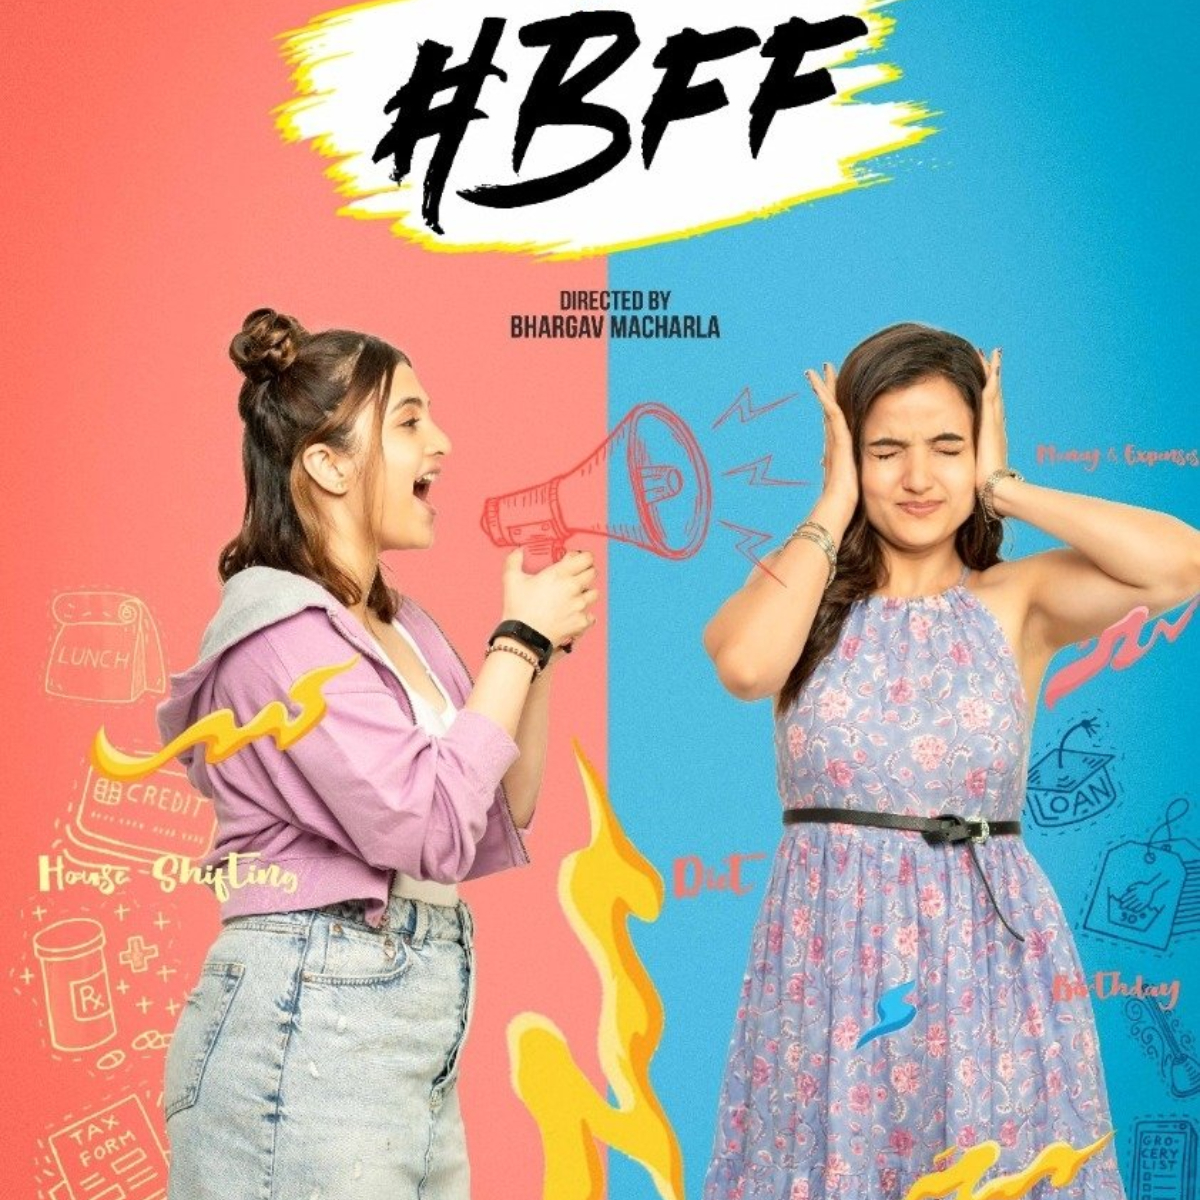 BFF Review: This remake of 'Adulting' just can't outgrow its YouTube-heavy attributes